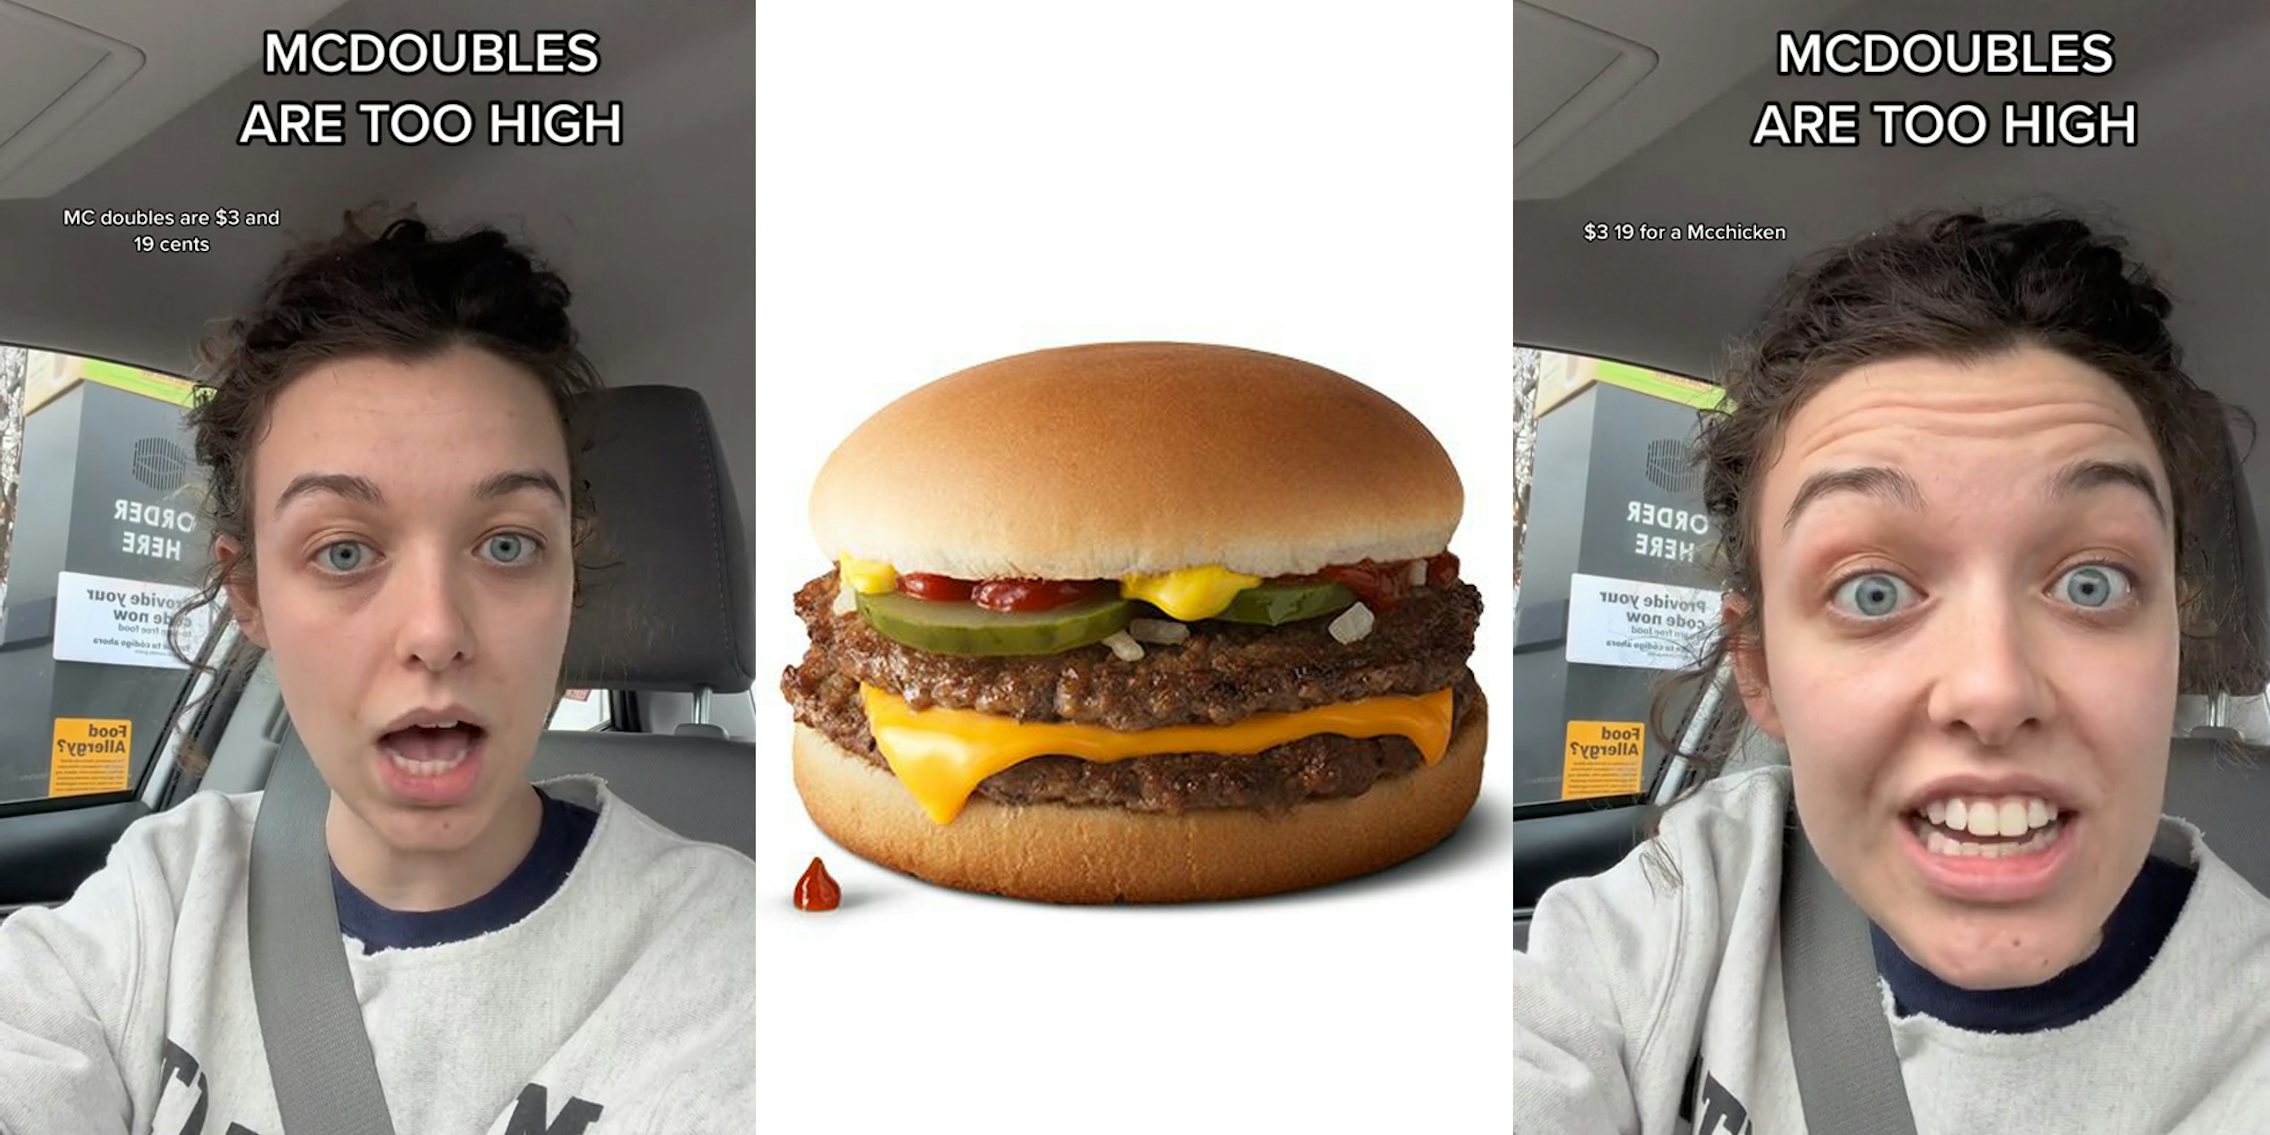 McDonalds customer at drive thru with caption 'MCDOUBBBLES ARE TOO HIGH' 'MC doubles are $3 and 19 cents' (l) McDouble in front of white background (c) McDonalds customer at drive thru with caption 'MCDOUBBBLES ARE TOO HIGH' '$3.19 for a Mcchicken' (r)